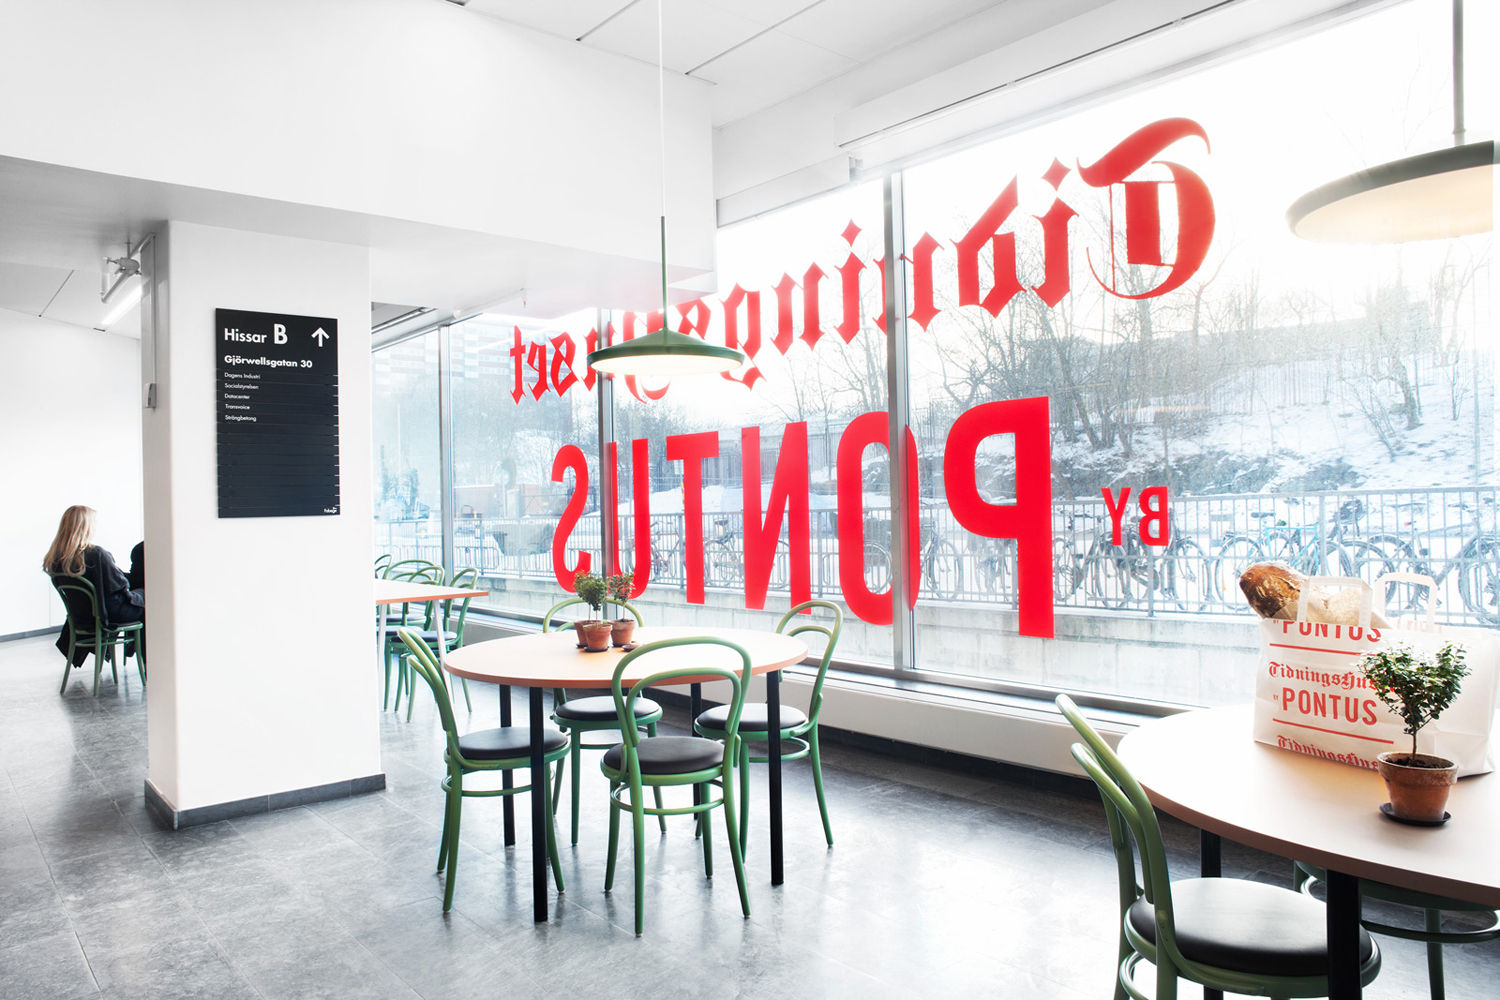 Brand identity and signage for Stockholm lunch restaurant Tidningshuset by Pontus by Bold, Sweden